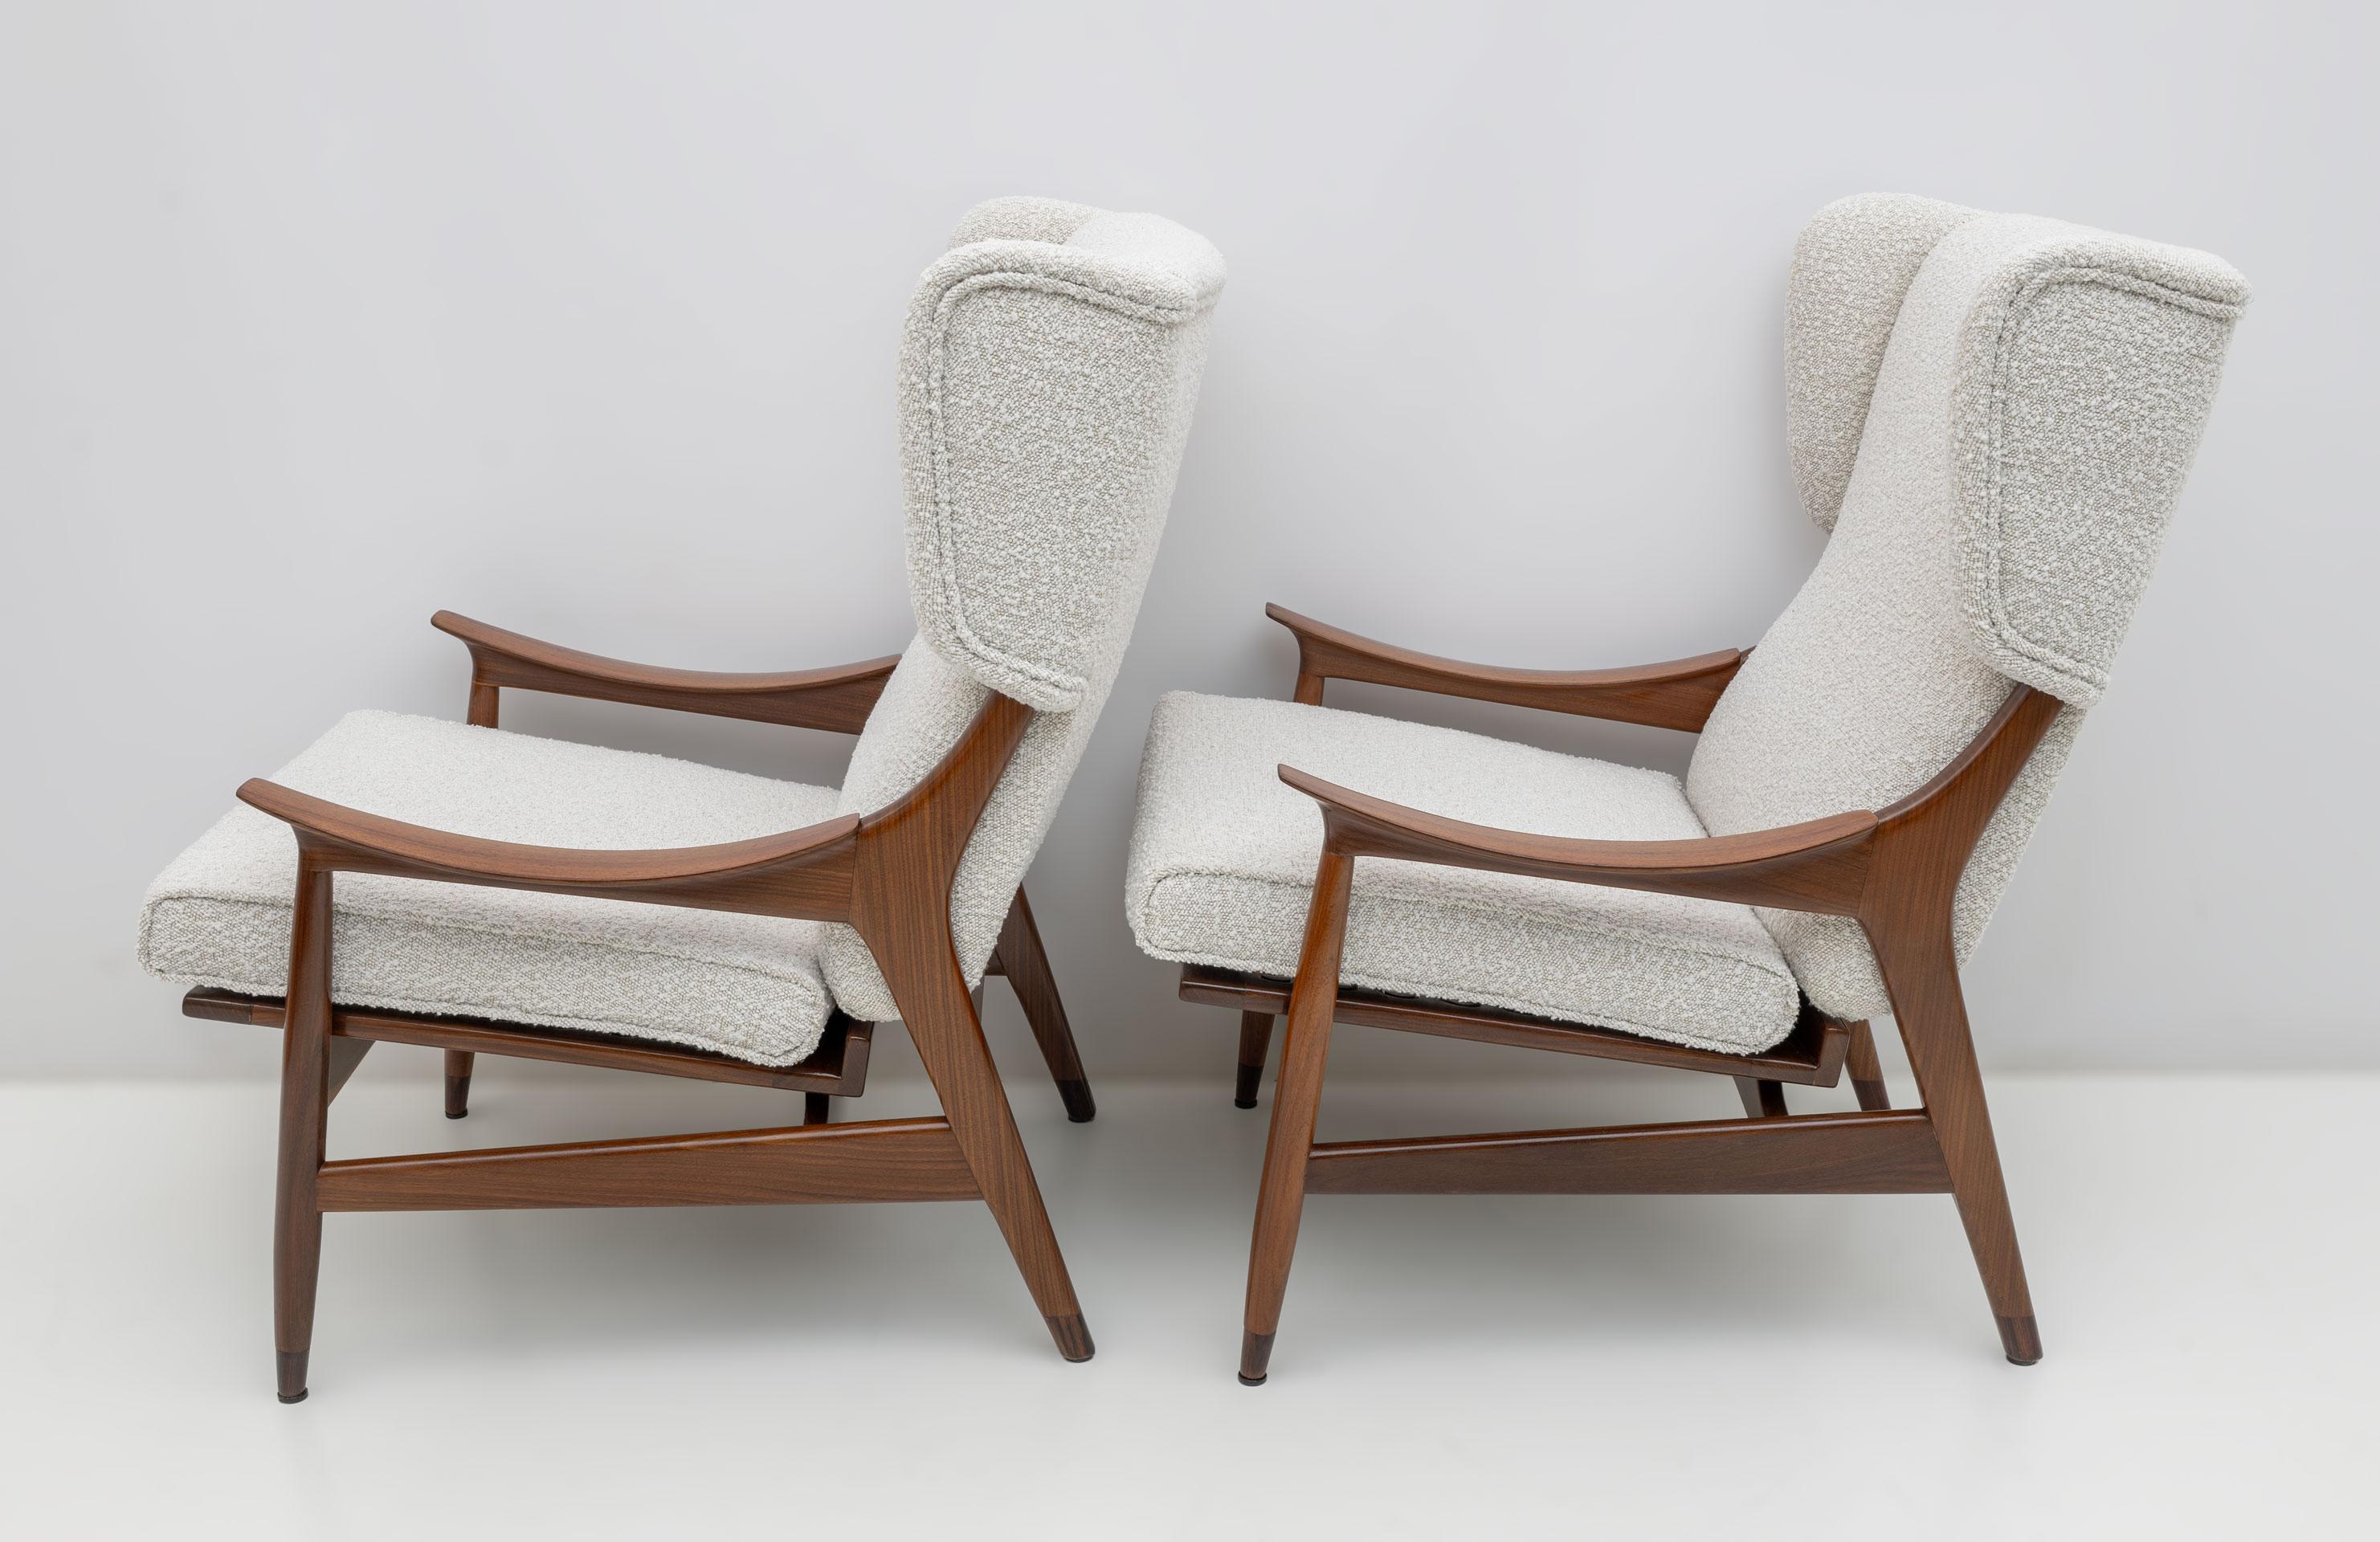 Pair of Mid-Century Modern Teak and Bouclè Armchairs Model FM 106 by Framar, 50s For Sale 2